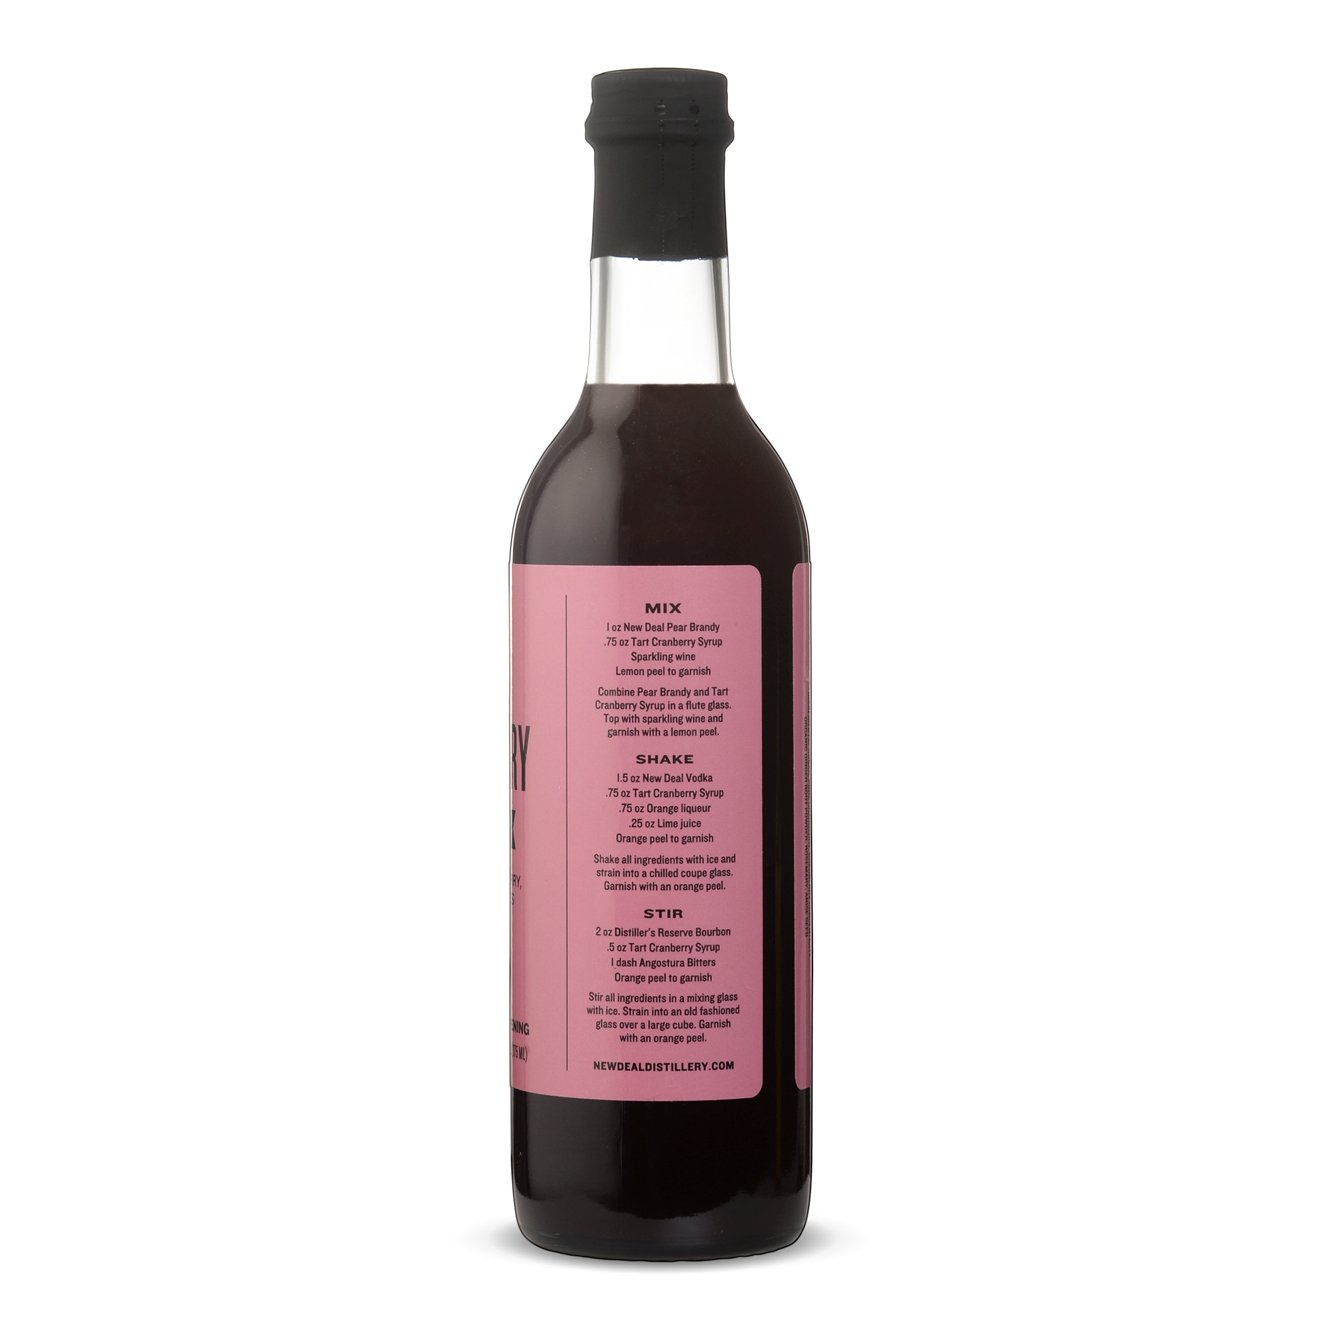 New Deal Tart Cranberry Syrup